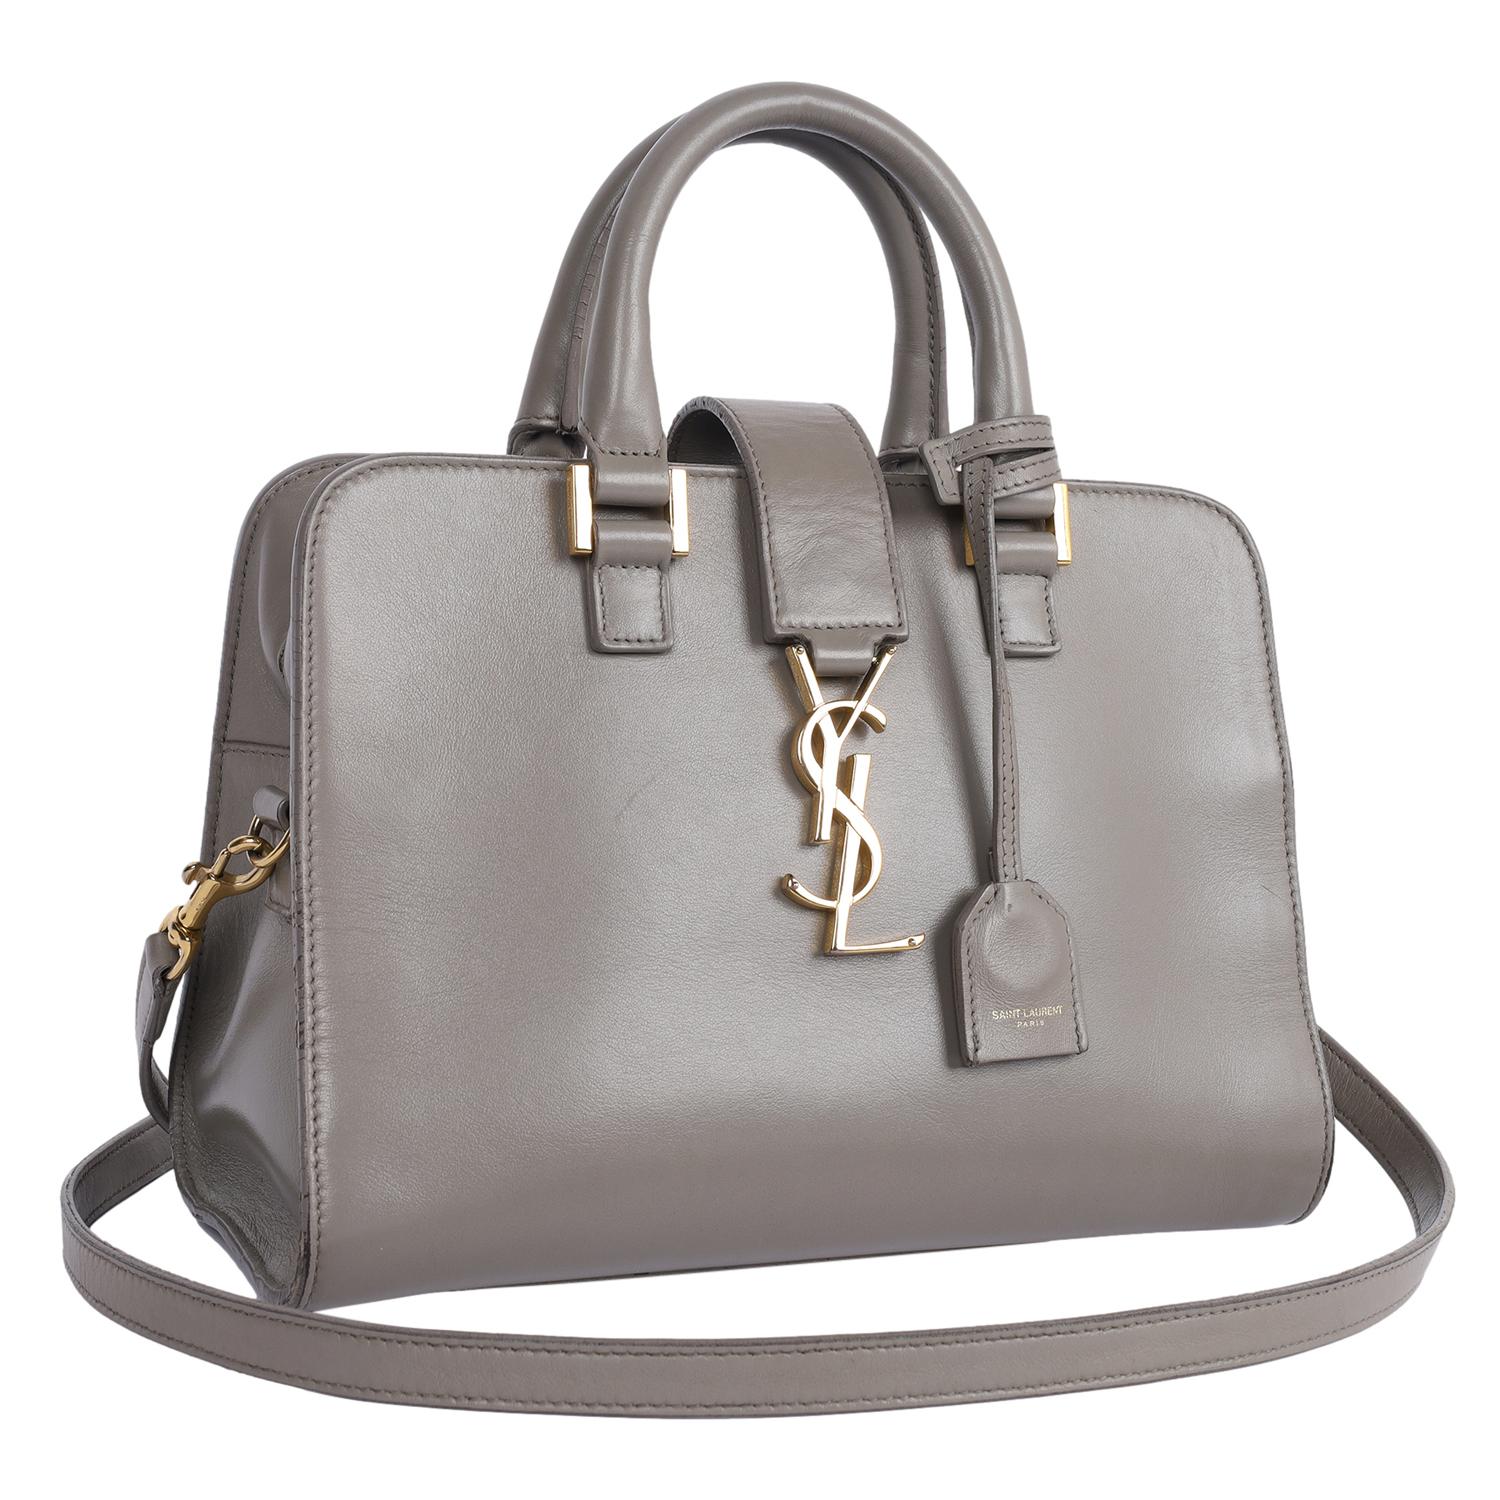 Authentic, pre-loved Saint Laurent YSL Calfskin Monogram Baby Cabas in Grey. This lovely handbag features smooth calfskin leather, rolled leather top handles, an optional removeable shoulder crossbody strap, gold YSL snap closure and zipper top